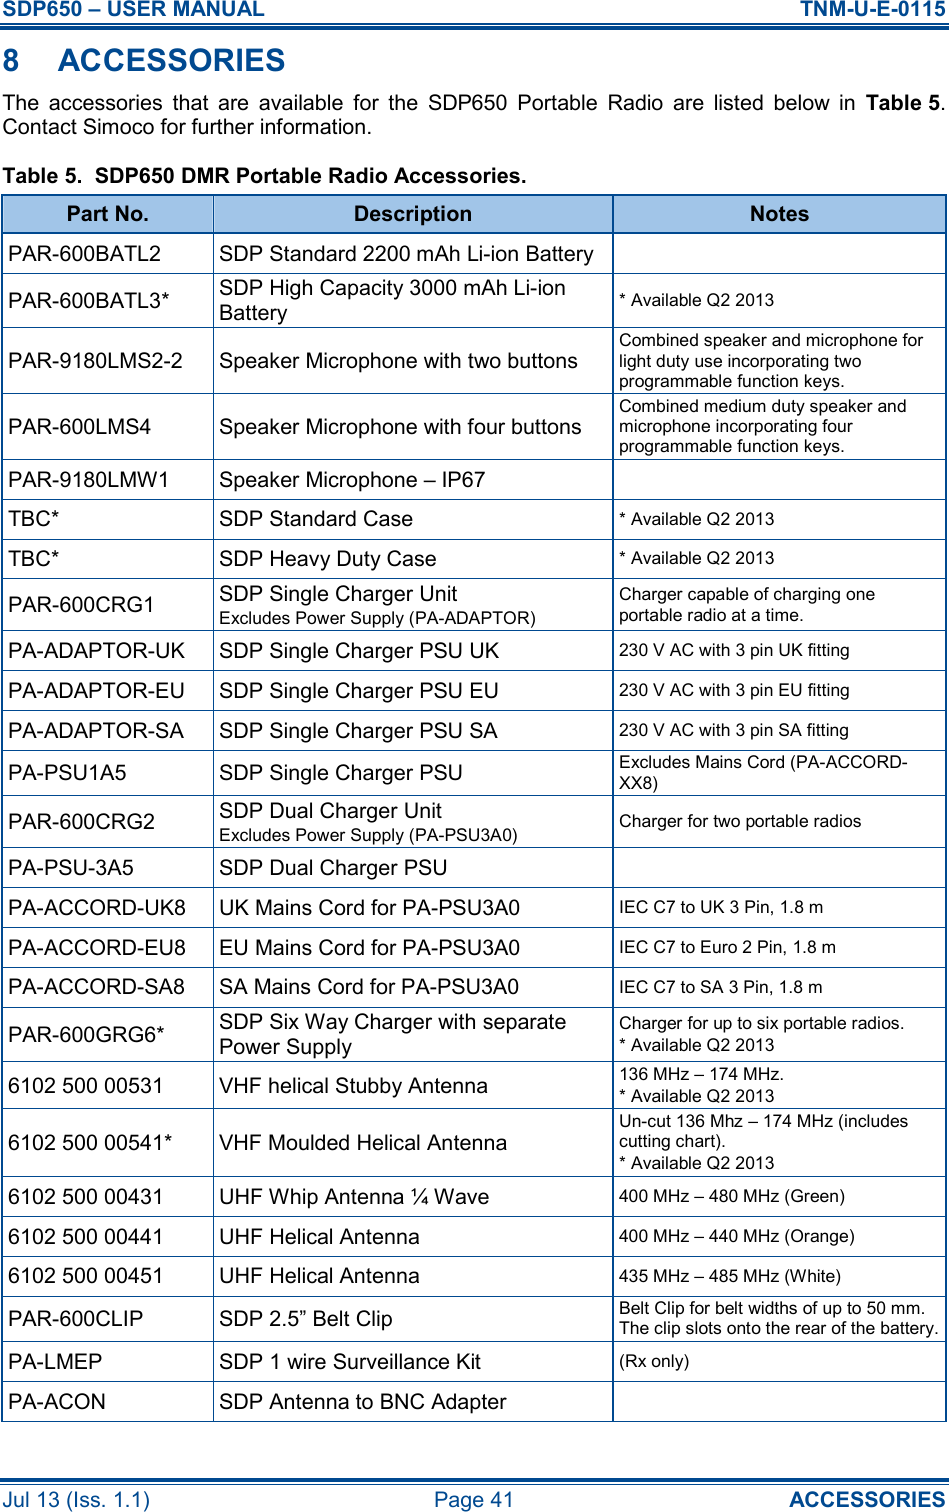 SDP650 – USER MANUAL  TNM-U-E-0115 Jul 13 (Iss. 1.1)  Page 41  ACCESSORIES 8  ACCESSORIES The  accessories  that  are  available  for  the  SDP650  Portable  Radio  are  listed  below  in  Table 5.  Contact Simoco for further information. Table 5.  SDP650 DMR Portable Radio Accessories. Part No.  Description  Notes PAR-600BATL2  SDP Standard 2200 mAh Li-ion Battery  PAR-600BATL3*  SDP High Capacity 3000 mAh Li-ion Battery * Available Q2 2013 PAR-9180LMS2-2  Speaker Microphone with two buttons Combined speaker and microphone for light duty use incorporating two programmable function keys. PAR-600LMS4  Speaker Microphone with four buttons Combined medium duty speaker and microphone incorporating four programmable function keys. PAR-9180LMW1  Speaker Microphone – IP67  TBC*  SDP Standard Case * Available Q2 2013 TBC*  SDP Heavy Duty Case * Available Q2 2013 PAR-600CRG1  SDP Single Charger Unit Excludes Power Supply (PA-ADAPTOR) Charger capable of charging one portable radio at a time. PA-ADAPTOR-UK  SDP Single Charger PSU UK 230 V AC with 3 pin UK fitting PA-ADAPTOR-EU  SDP Single Charger PSU EU 230 V AC with 3 pin EU fitting PA-ADAPTOR-SA  SDP Single Charger PSU SA 230 V AC with 3 pin SA fitting PA-PSU1A5  SDP Single Charger PSU Excludes Mains Cord (PA-ACCORD-XX8) PAR-600CRG2  SDP Dual Charger Unit Excludes Power Supply (PA-PSU3A0)  Charger for two portable radios PA-PSU-3A5  SDP Dual Charger PSU  PA-ACCORD-UK8  UK Mains Cord for PA-PSU3A0 IEC C7 to UK 3 Pin, 1.8 m PA-ACCORD-EU8  EU Mains Cord for PA-PSU3A0 IEC C7 to Euro 2 Pin, 1.8 m PA-ACCORD-SA8  SA Mains Cord for PA-PSU3A0 IEC C7 to SA 3 Pin, 1.8 m PAR-600GRG6*  SDP Six Way Charger with separate Power Supply Charger for up to six portable radios. * Available Q2 2013 6102 500 00531  VHF helical Stubby Antenna 136 MHz – 174 MHz. * Available Q2 2013 6102 500 00541*  VHF Moulded Helical Antenna Un-cut 136 Mhz – 174 MHz (includes cutting chart). * Available Q2 2013 6102 500 00431  UHF Whip Antenna ¼ Wave 400 MHz – 480 MHz (Green) 6102 500 00441  UHF Helical Antenna 400 MHz – 440 MHz (Orange) 6102 500 00451  UHF Helical Antenna 435 MHz – 485 MHz (White) PAR-600CLIP  SDP 2.5” Belt Clip Belt Clip for belt widths of up to 50 mm.  The clip slots onto the rear of the battery. PA-LMEP  SDP 1 wire Surveillance Kit (Rx only) PA-ACON  SDP Antenna to BNC Adapter  